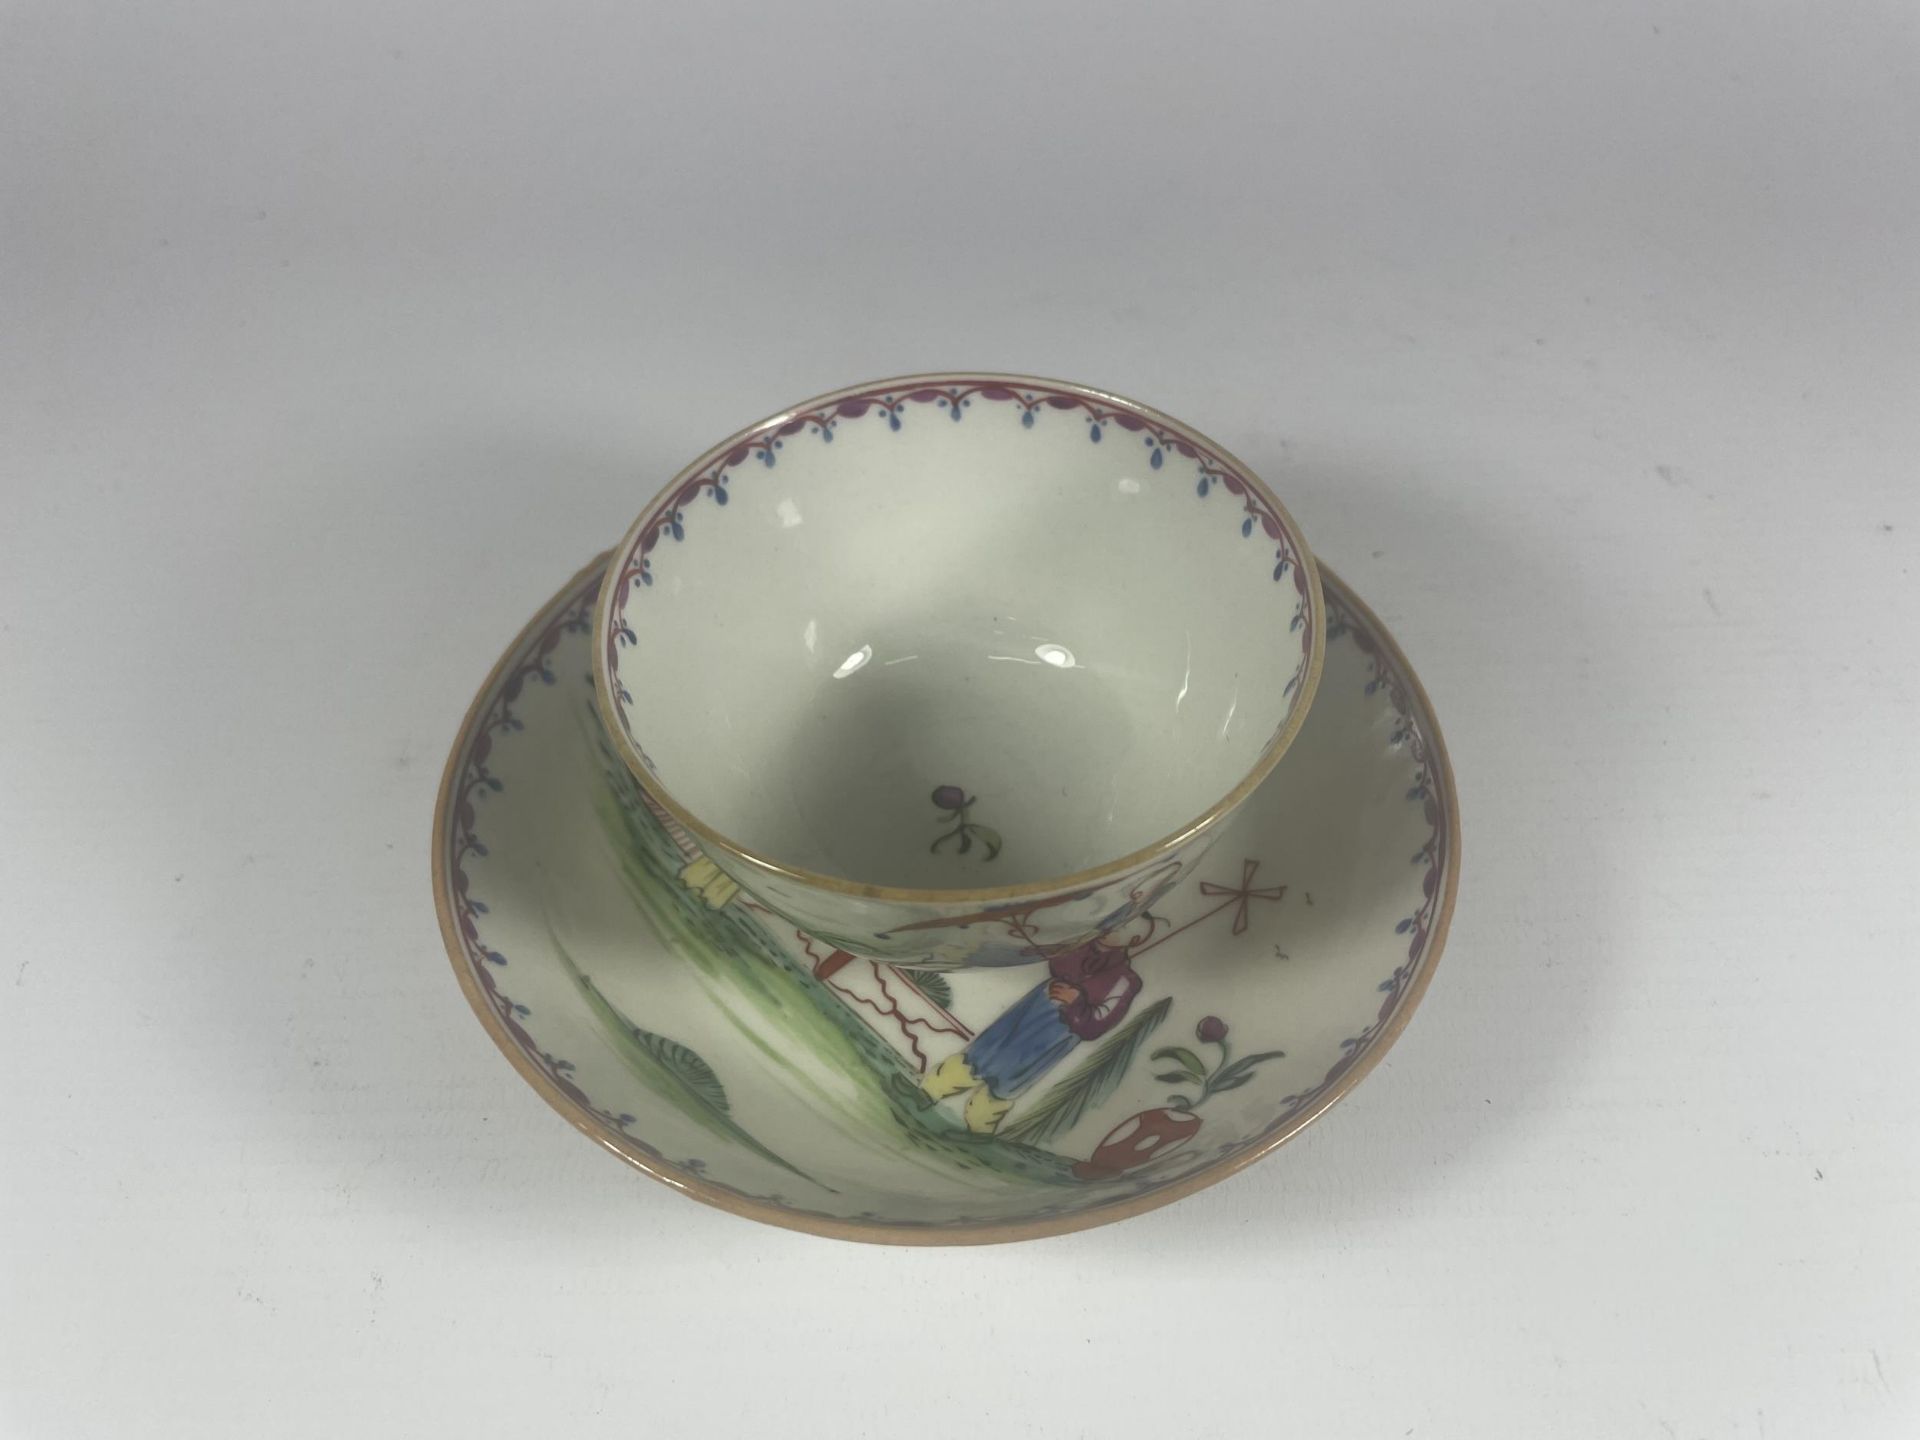 A 19TH CENTURY ENGLISH PORCELAIN TEA BOWL & SAUCER DEPICTING AN ORIENTAL SCENE - Image 2 of 4